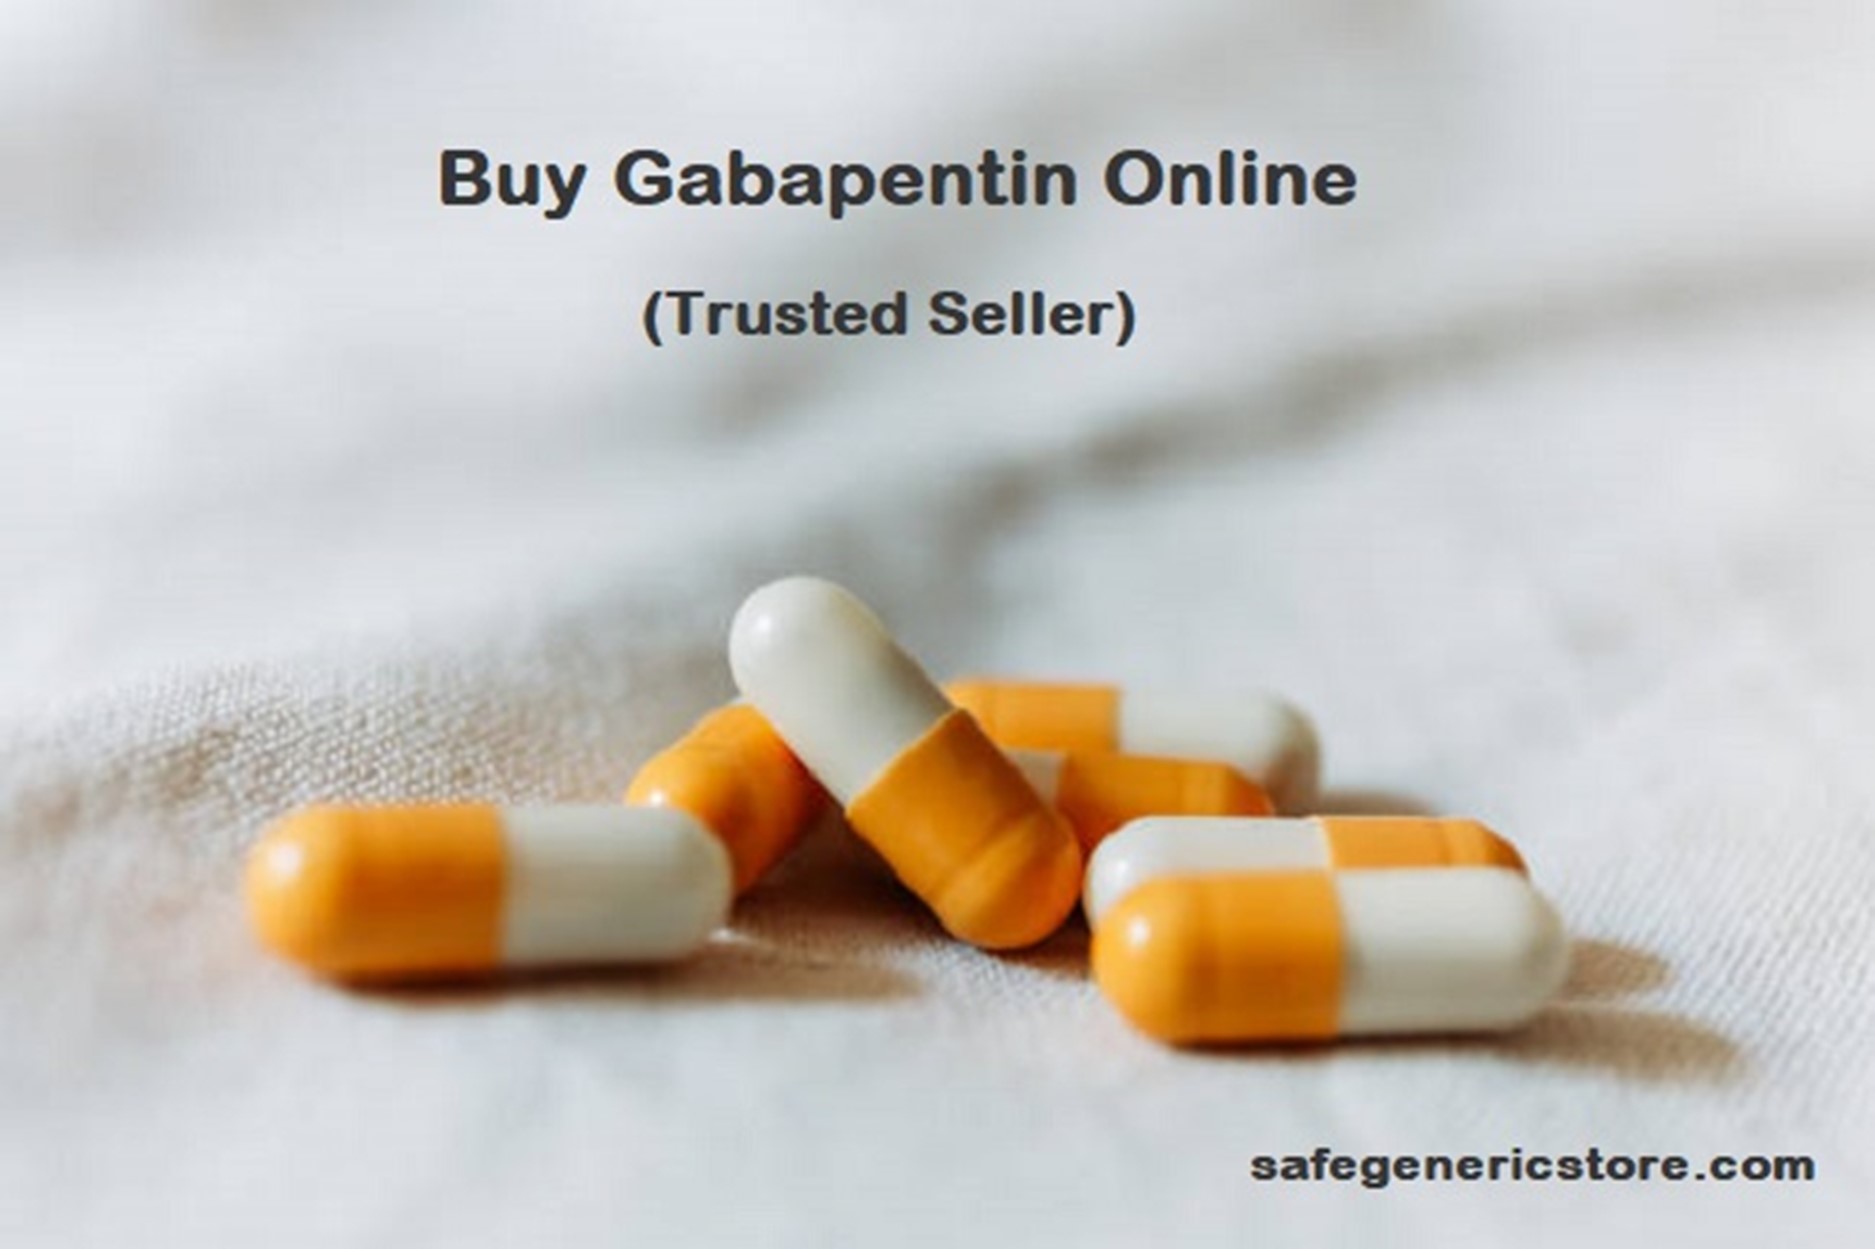 How To Buy Gabapentin Online In The USA, UK